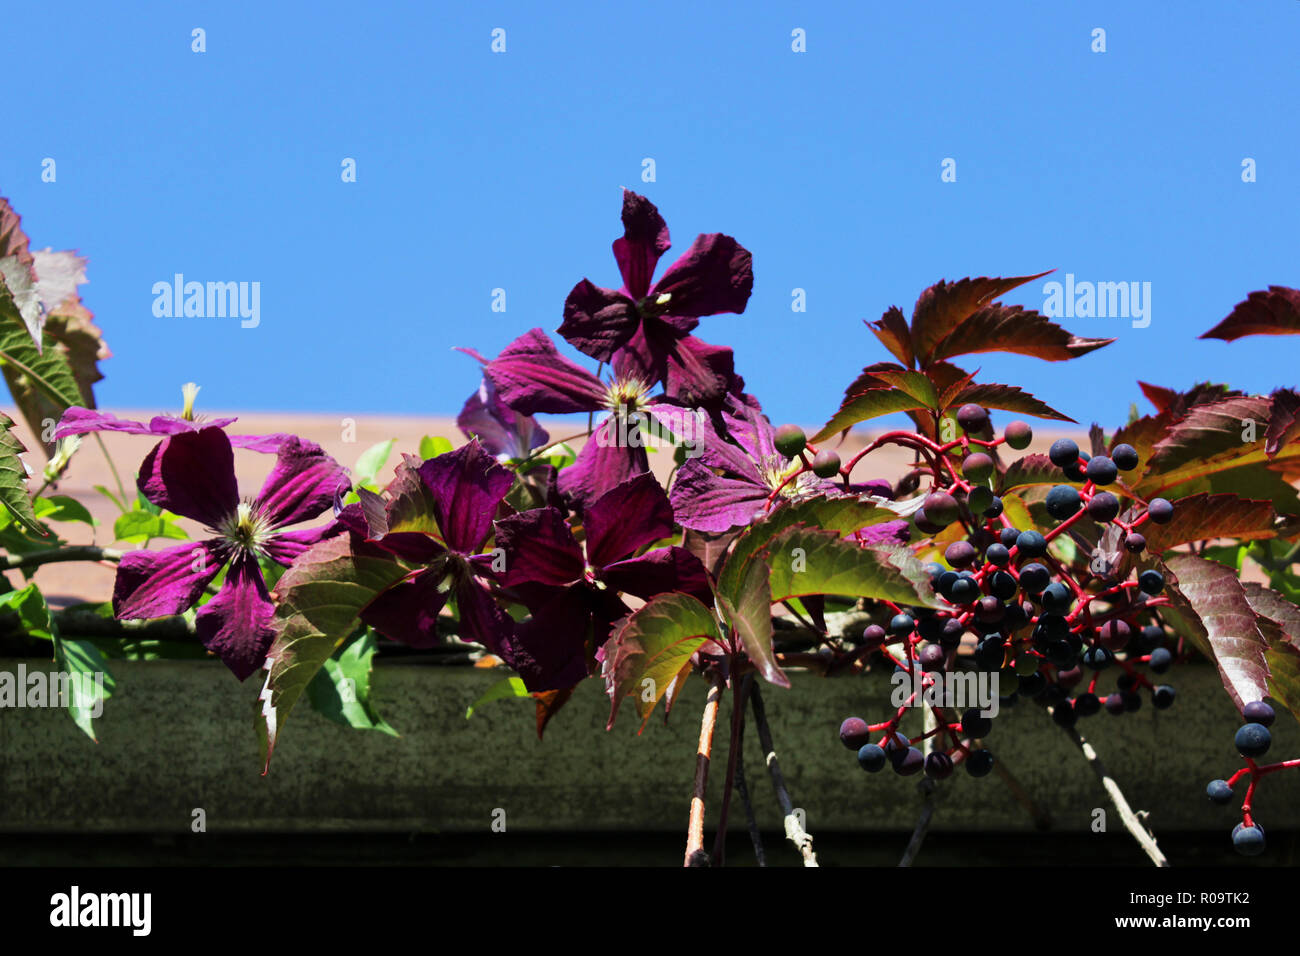 purple flowers of the plant clematis jakman and dark blue berries and colorful leaves of Parthenocissus quinquefolia, in the fall, on the garden plot. Stock Photo